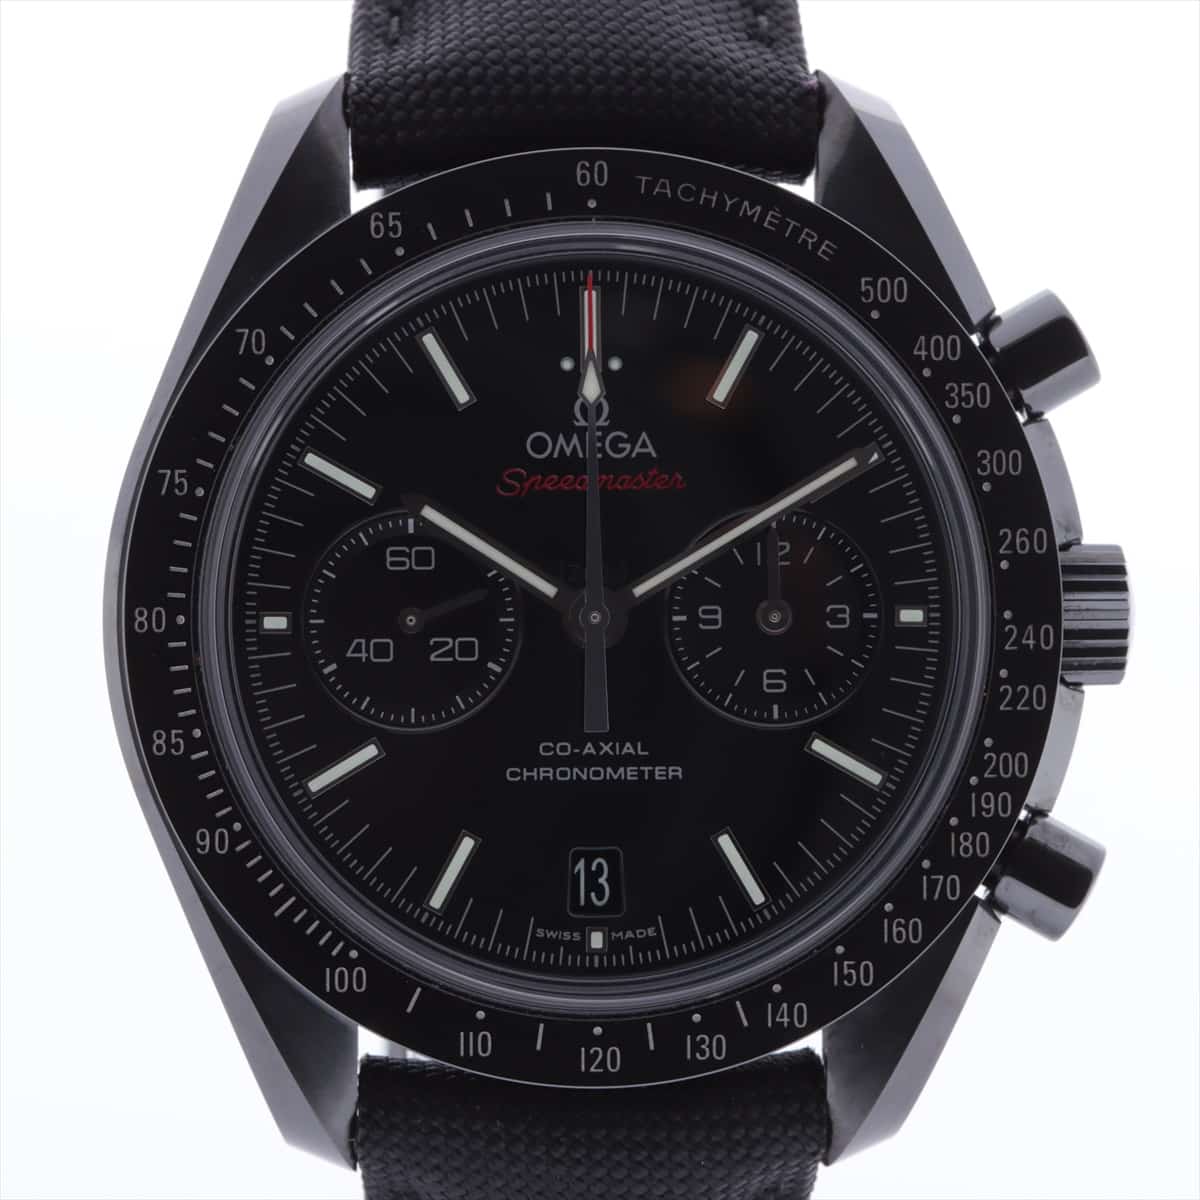 [Chrono] Omega Speedmaster  DARK SIDE Of The Moon 311.92.44.51.01.003 CEx Leather belt AT Black-Face